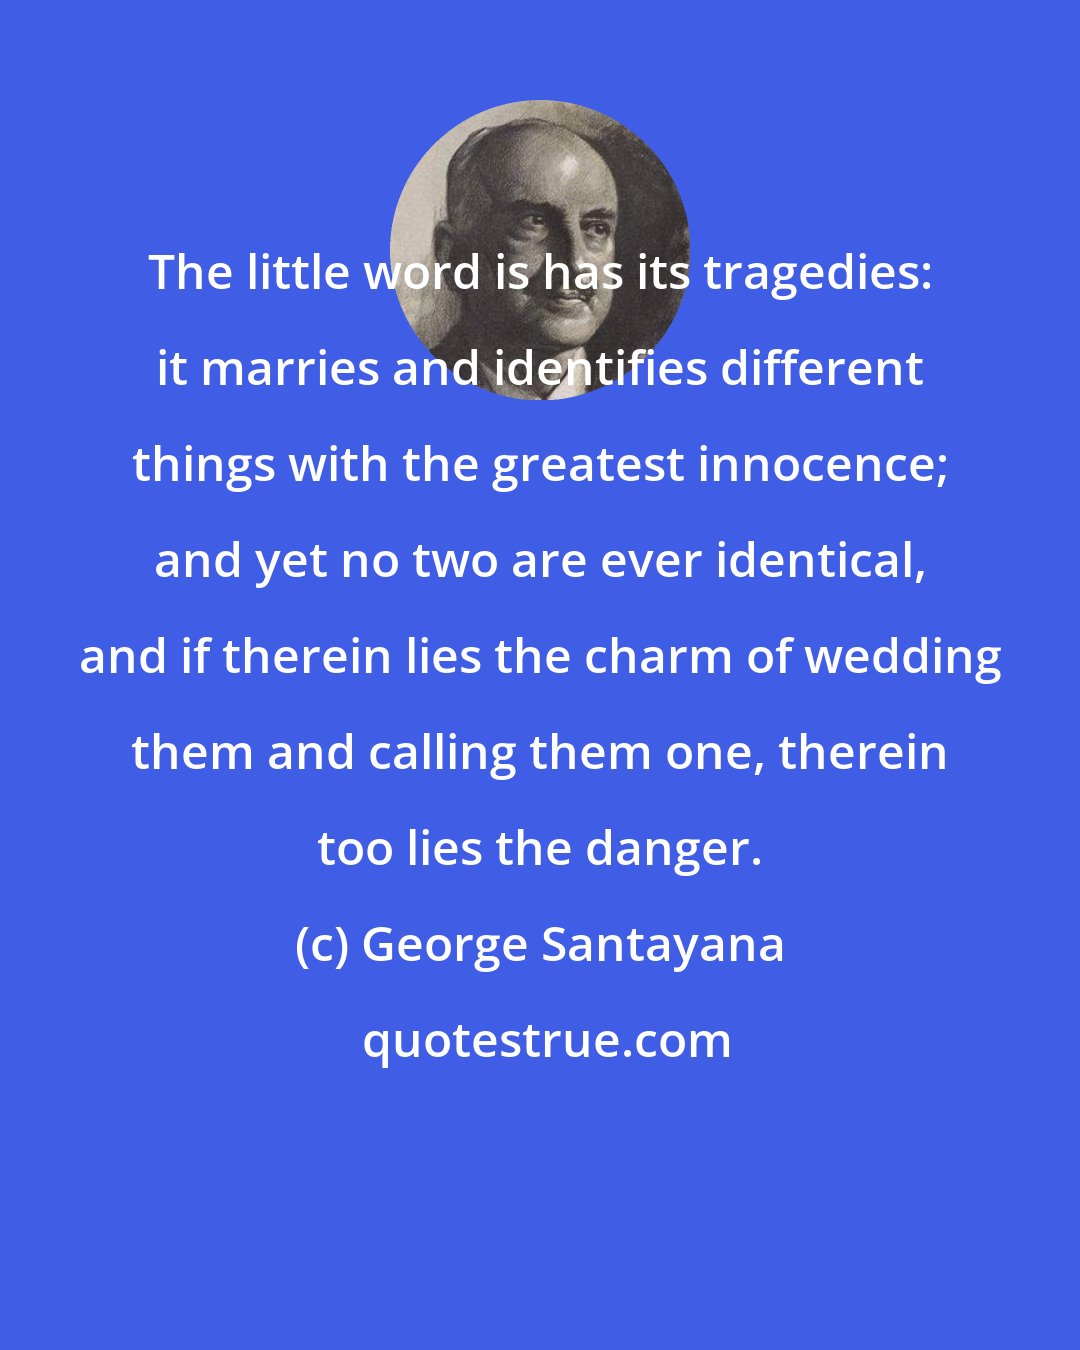 George Santayana: The little word is has its tragedies: it marries and identifies different things with the greatest innocence; and yet no two are ever identical, and if therein lies the charm of wedding them and calling them one, therein too lies the danger.